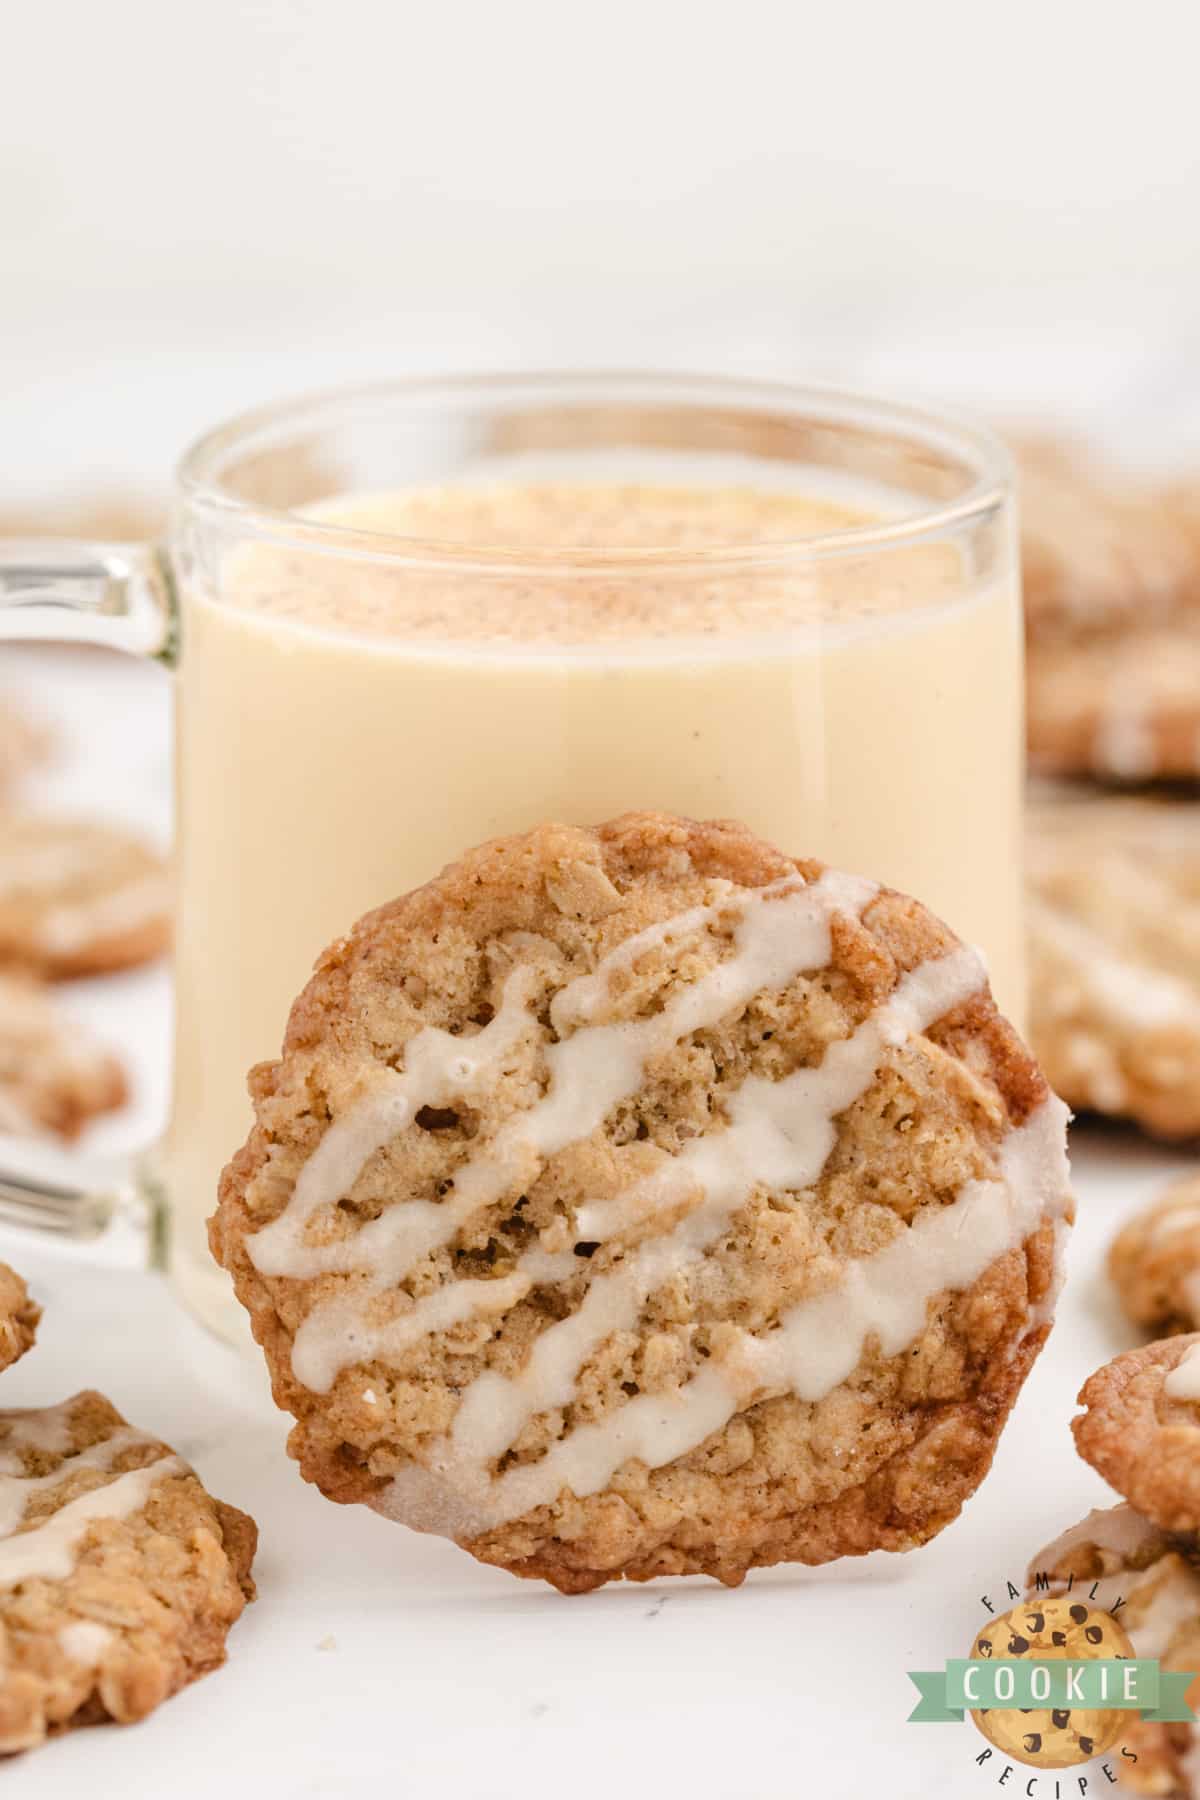 Oatmeal cookie and a glass of eggnog.